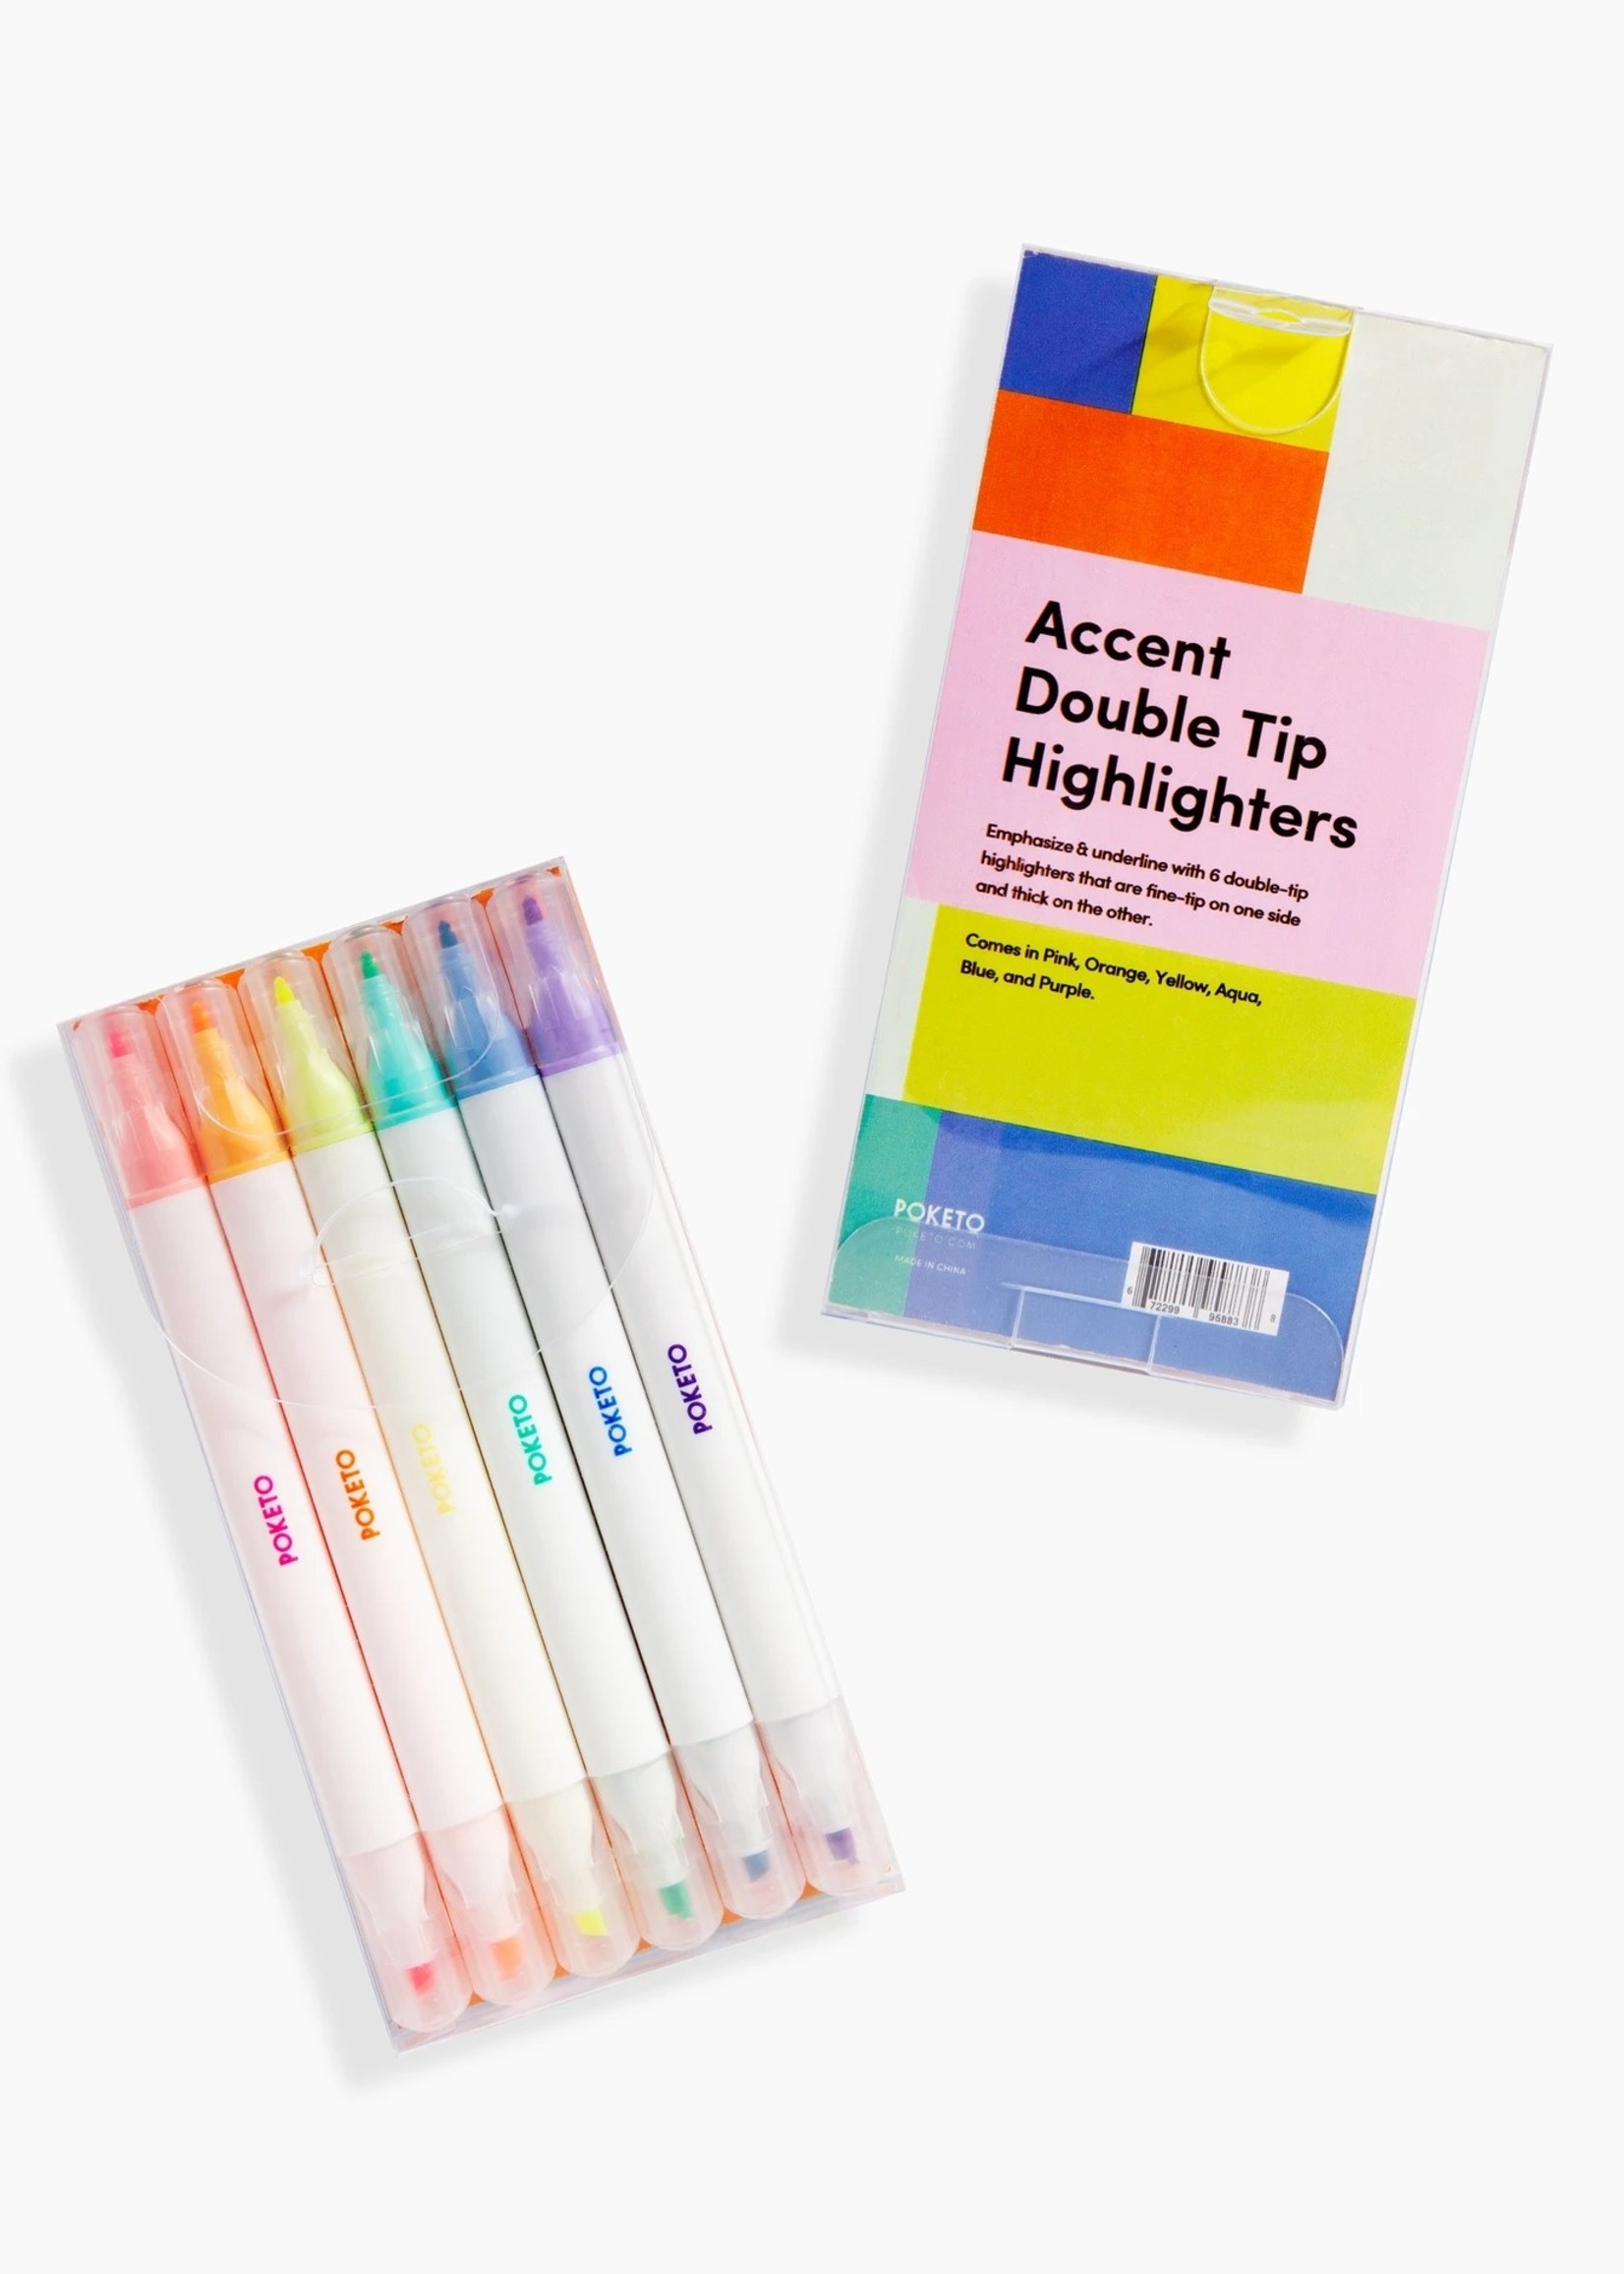 Poketo Accent Double Tip Highlighters